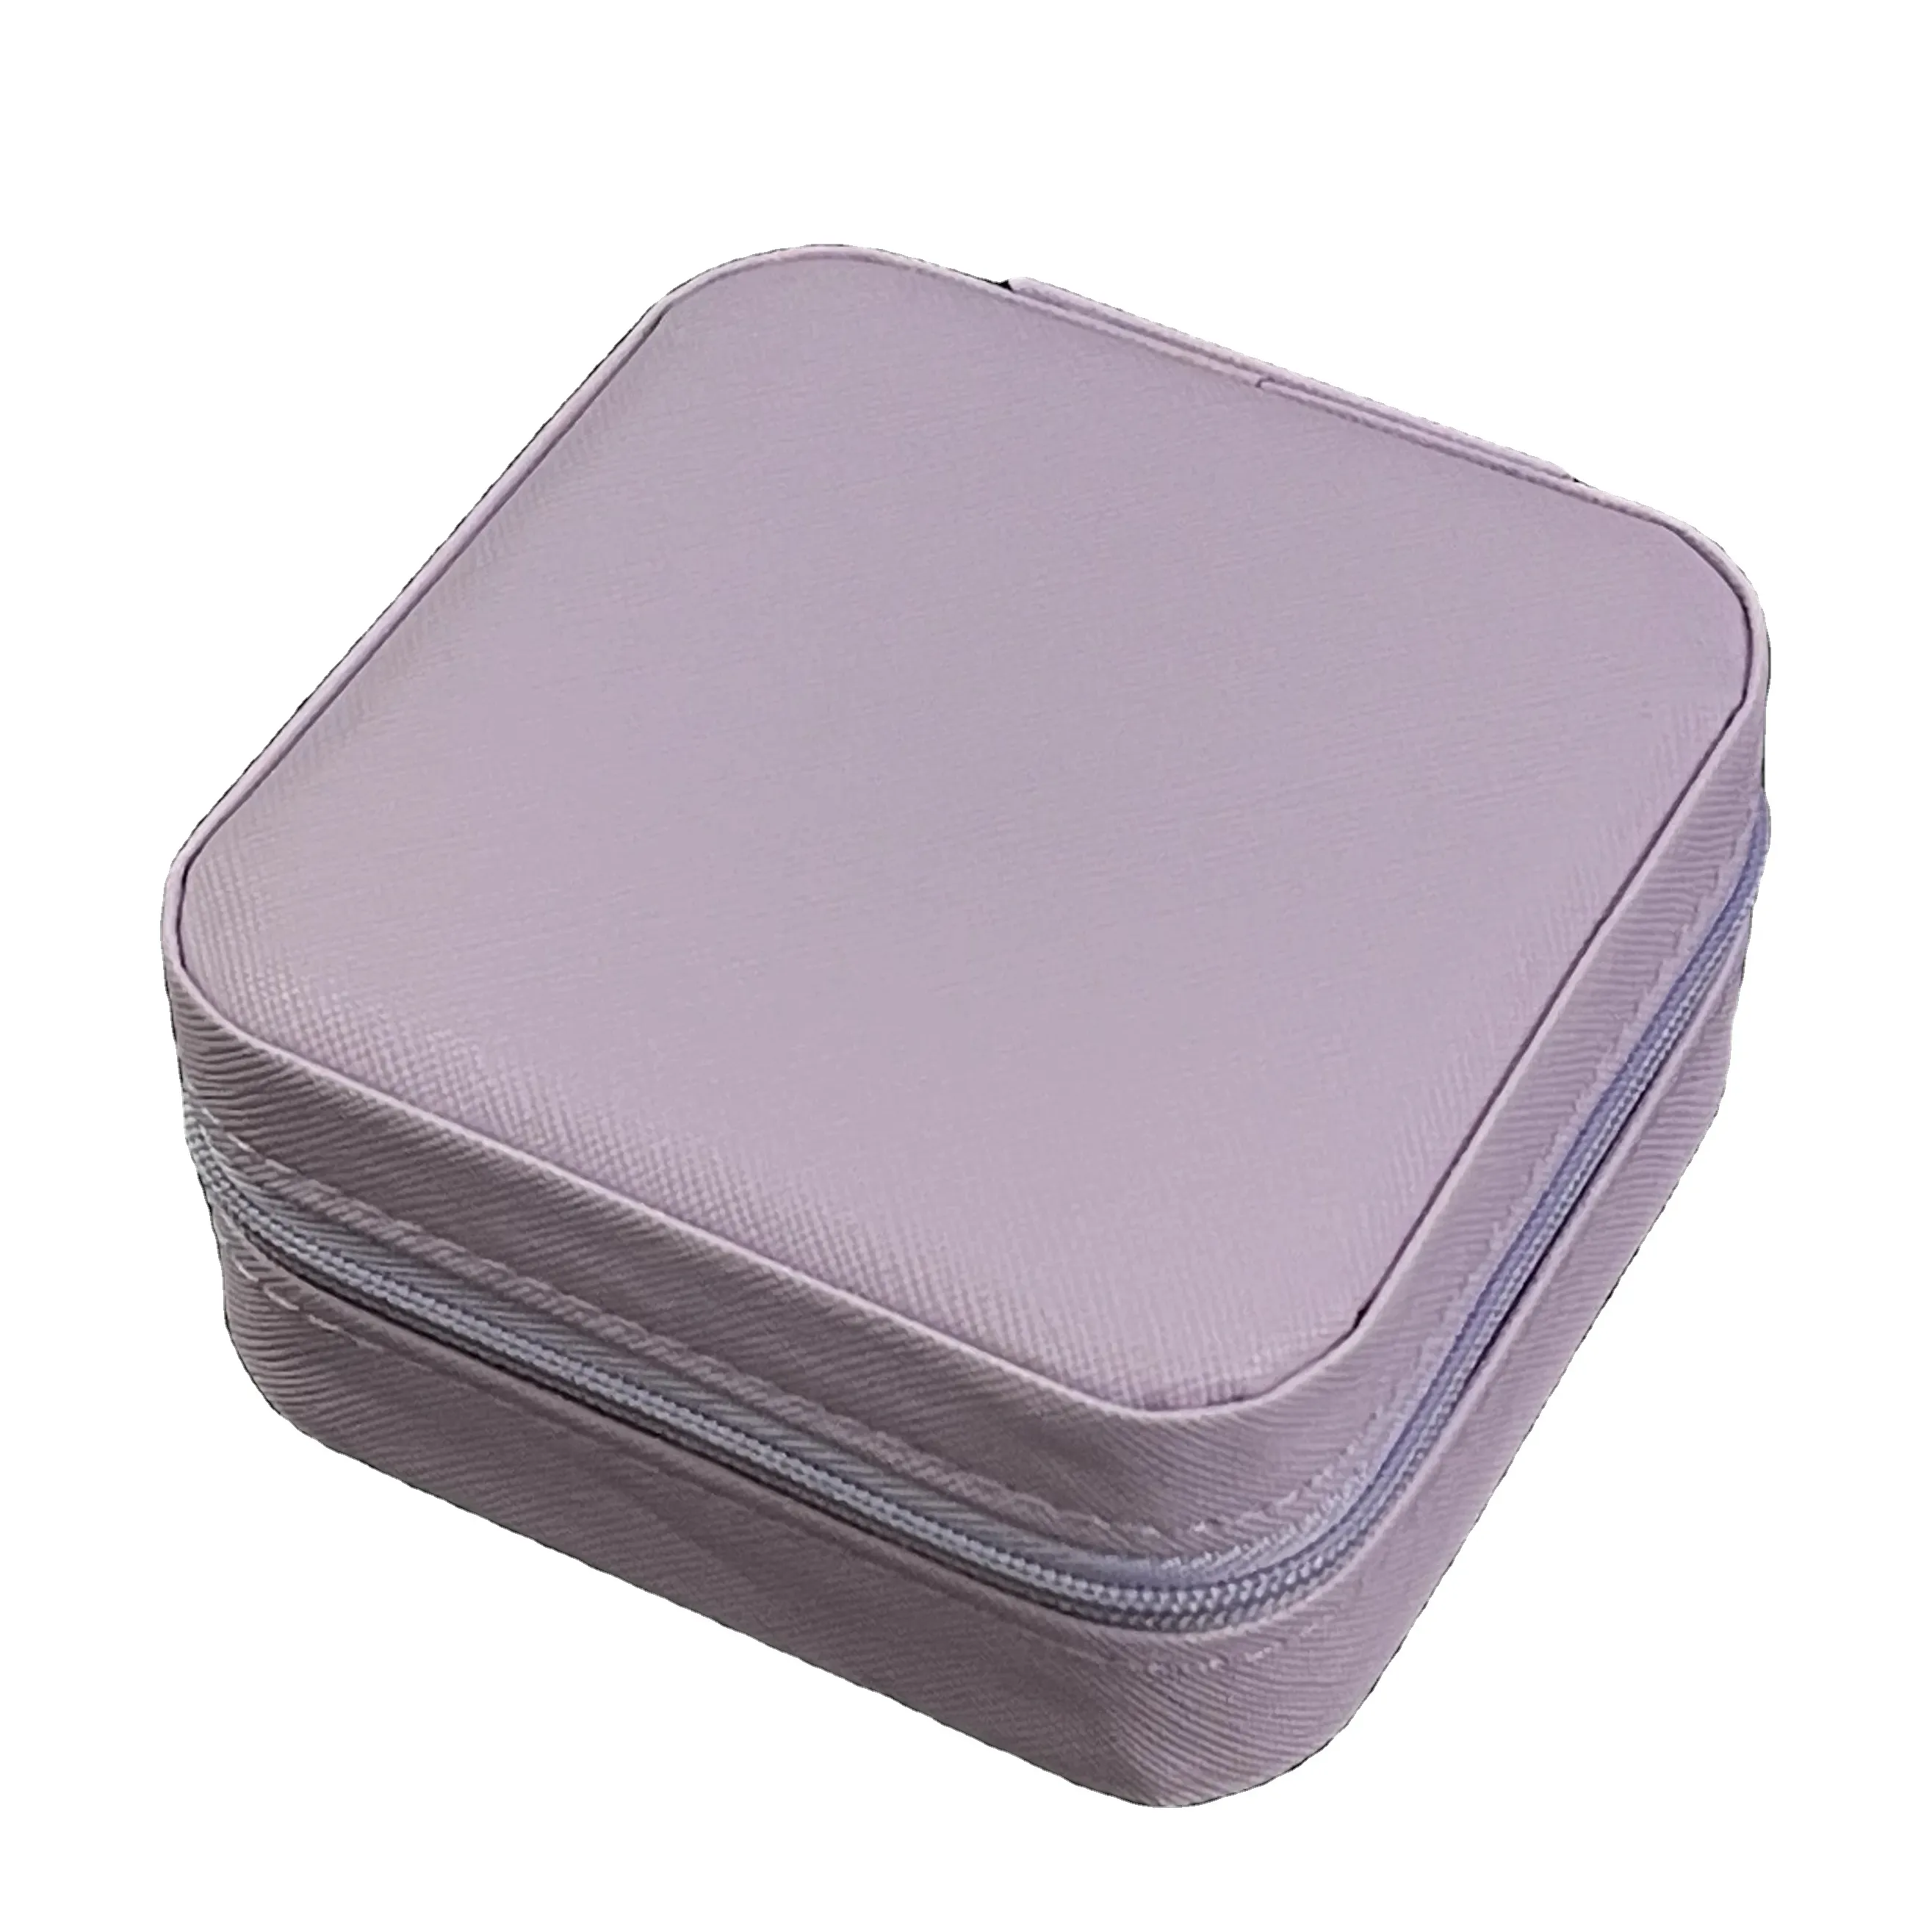 Purple Travel jewelry box- Customized your logo and color